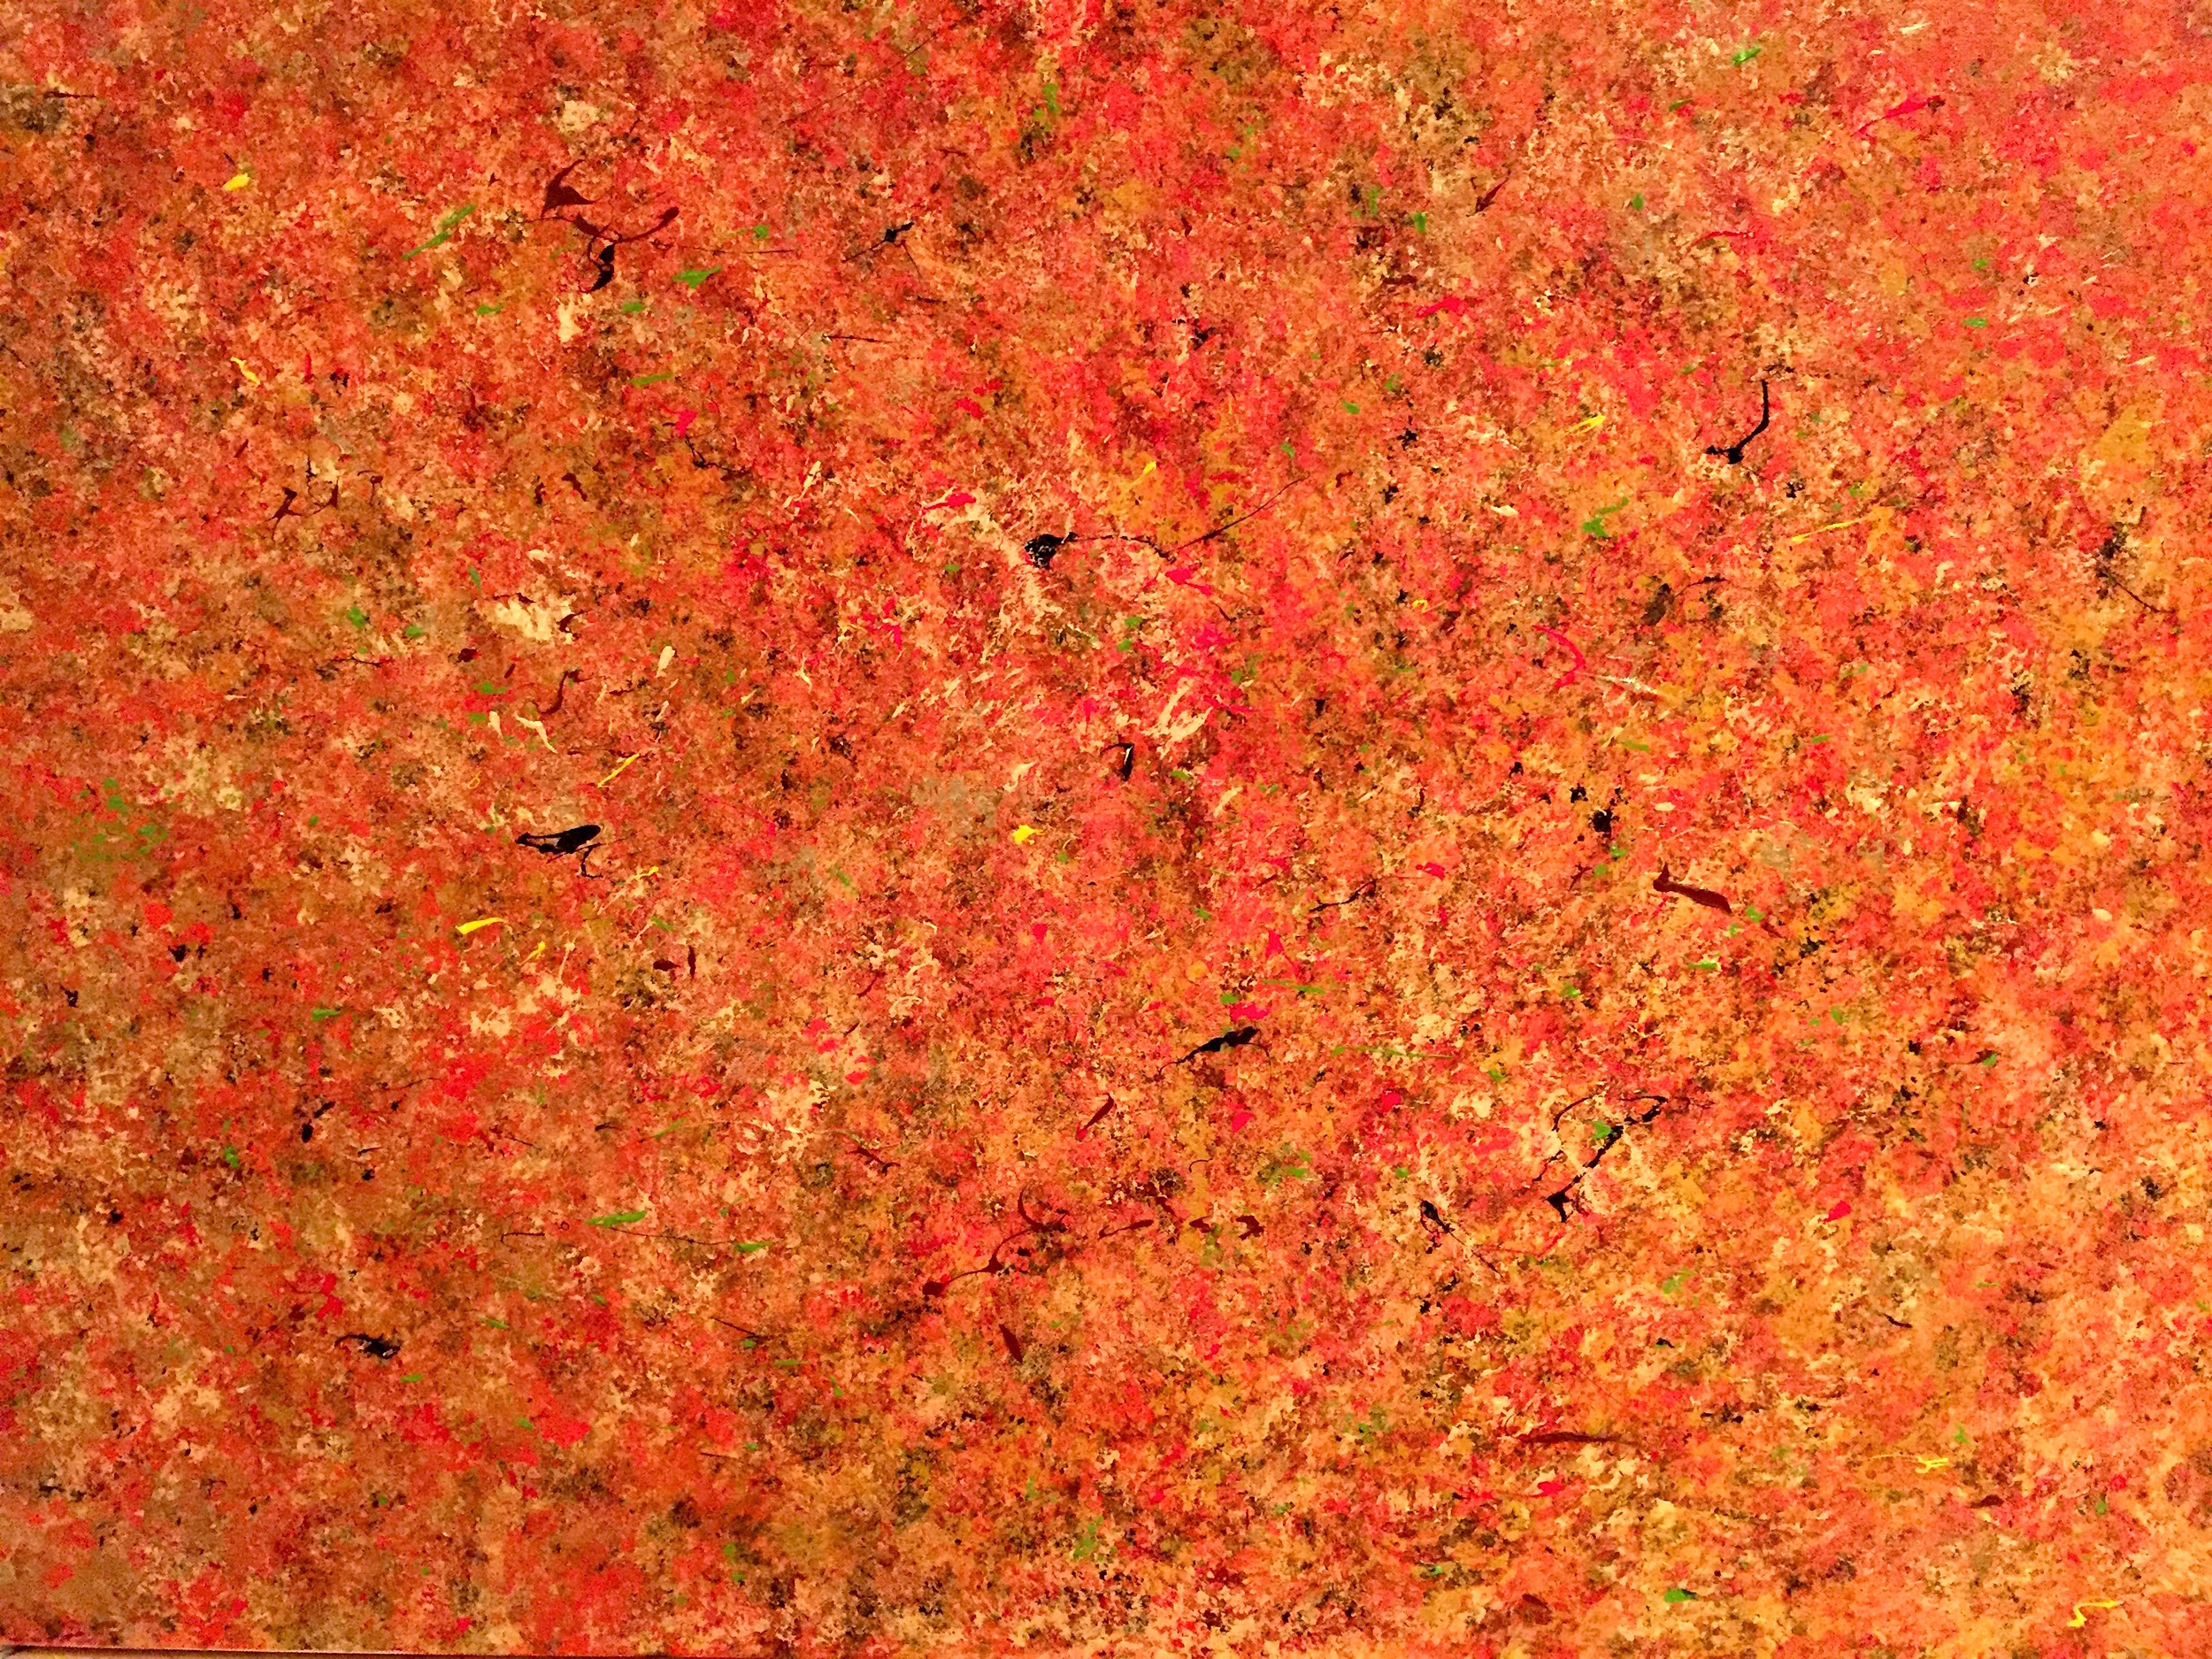   Orange Coral    Acrylic on Canvas    30 x 40 x 1.5 in.  